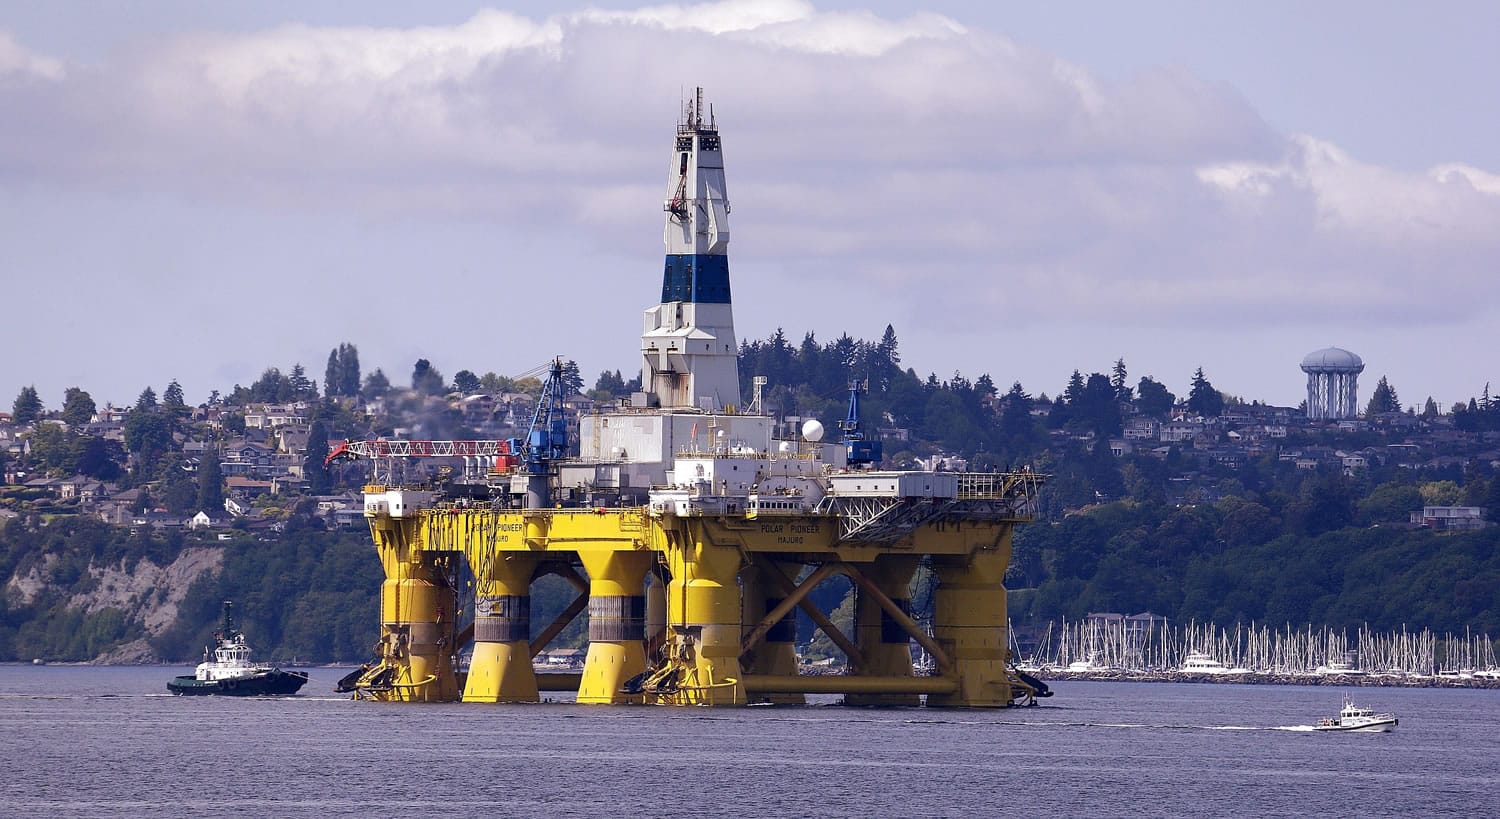 The oil drilling rig Polar Pioneer is towed toward a dock Thursday, May 14, 2015, in Elliott Bay in Seattle. The rig is the first of two drilling rigs Royal Dutch Shell is outfitting for oil exploration and was towed to the Port of Seattle site despite the city's warning that it lacks permits and threats by kayaking environmentalists to paddle out in protest.